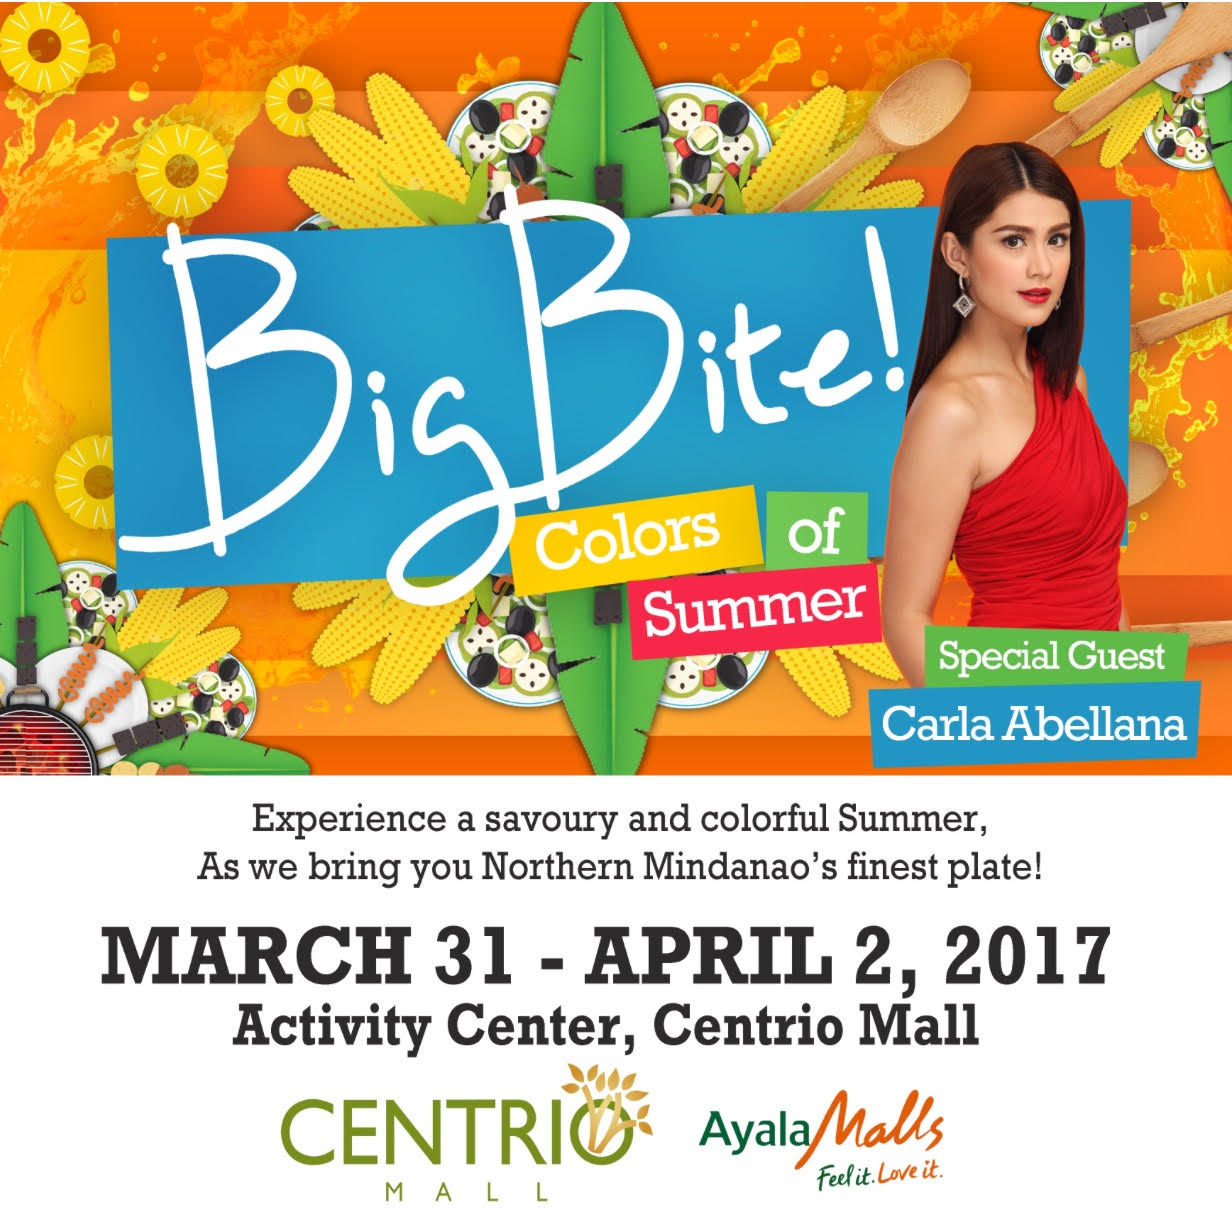 Big Bite 2017: Flavors of Summer at Centrio Mall Schedule of Activities